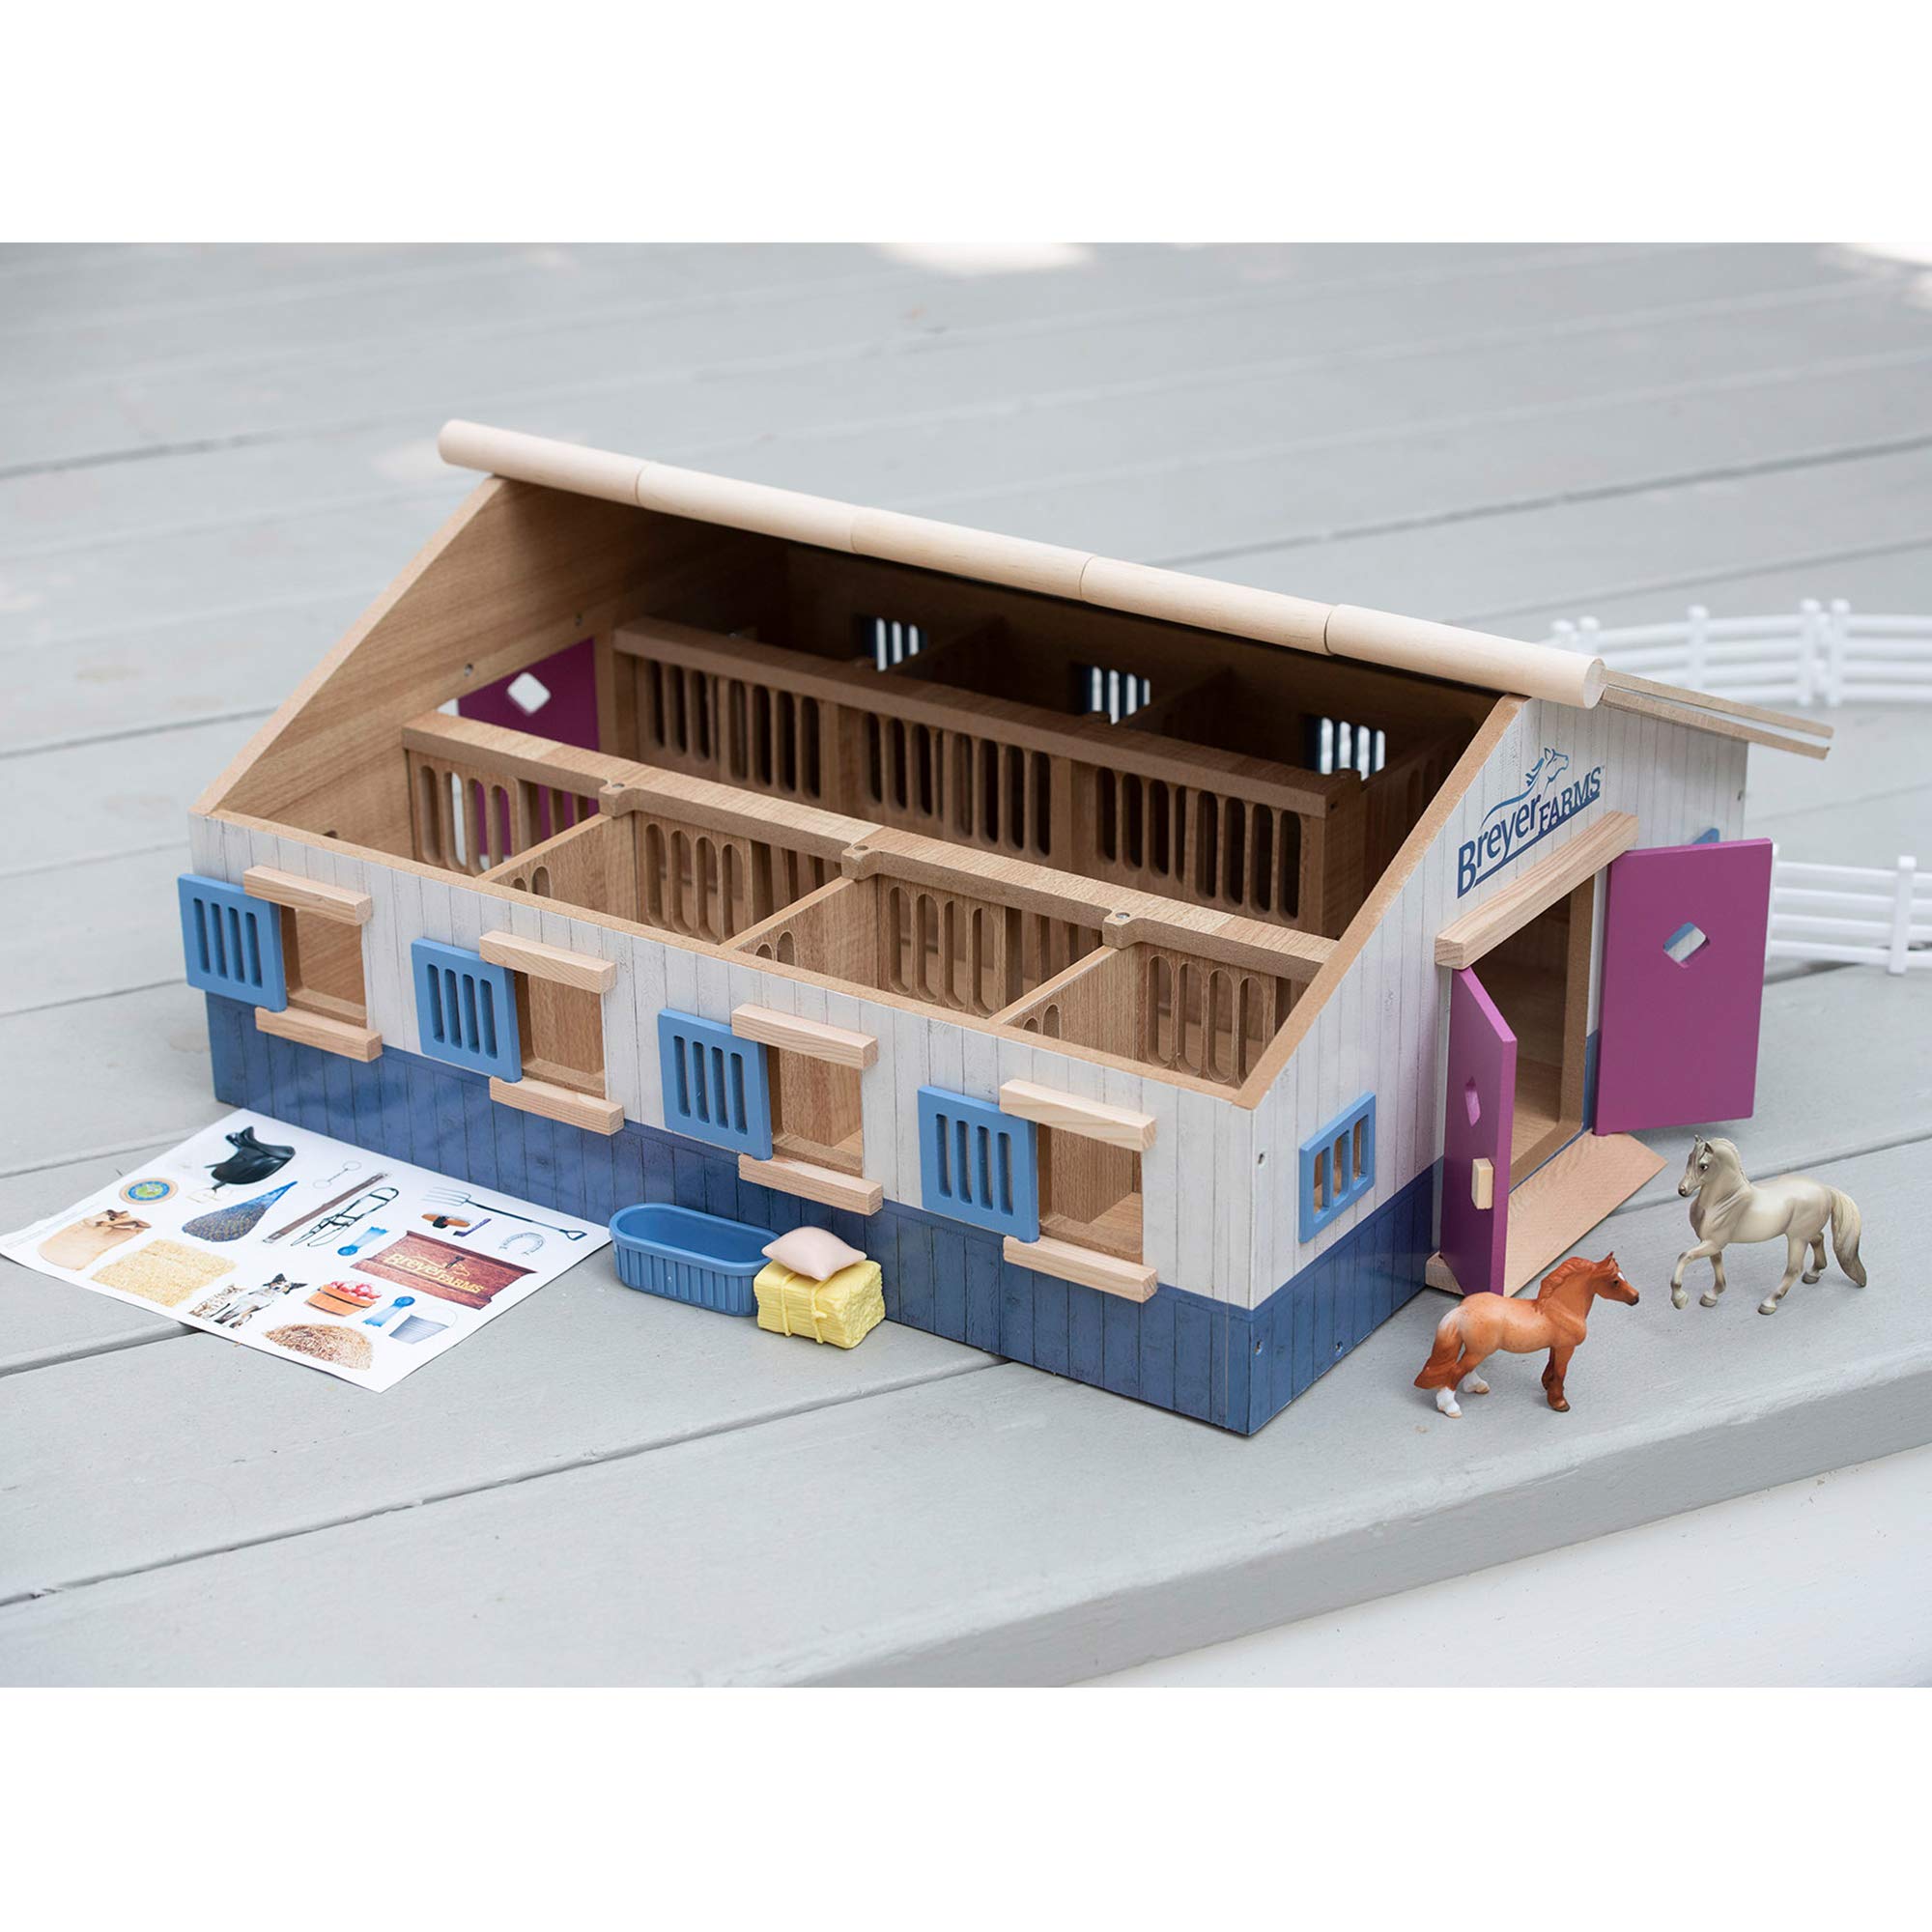 Breyer Horses Farms Deluxe Wooden Playset | 19 Piece Playset | 2 Stablemates Horses Included | 20